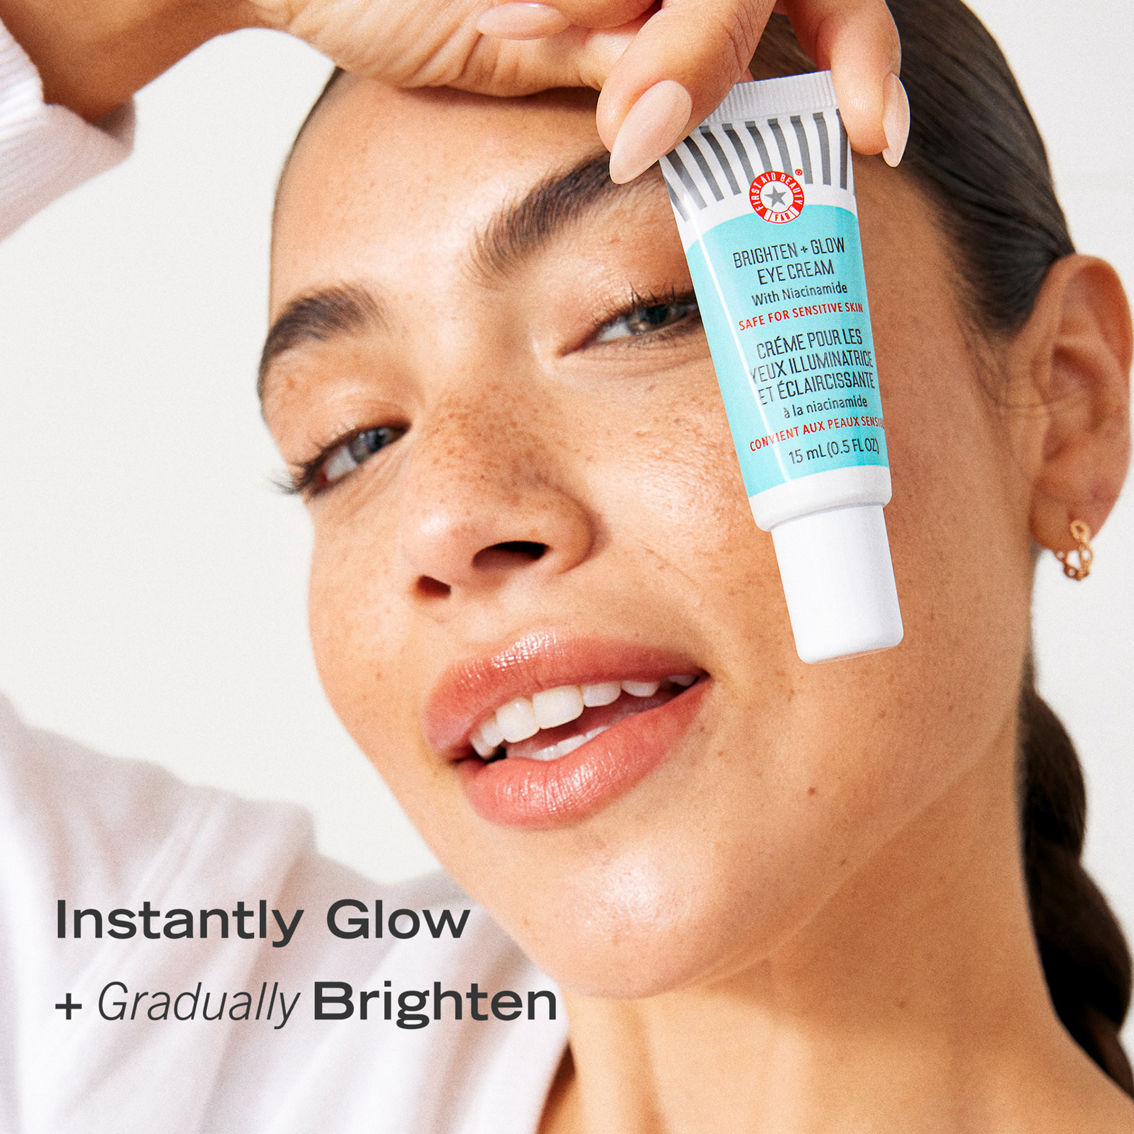 First Aid Beauty Brighten + Glow Eye Cream with Niacinamide - Image 2 of 3